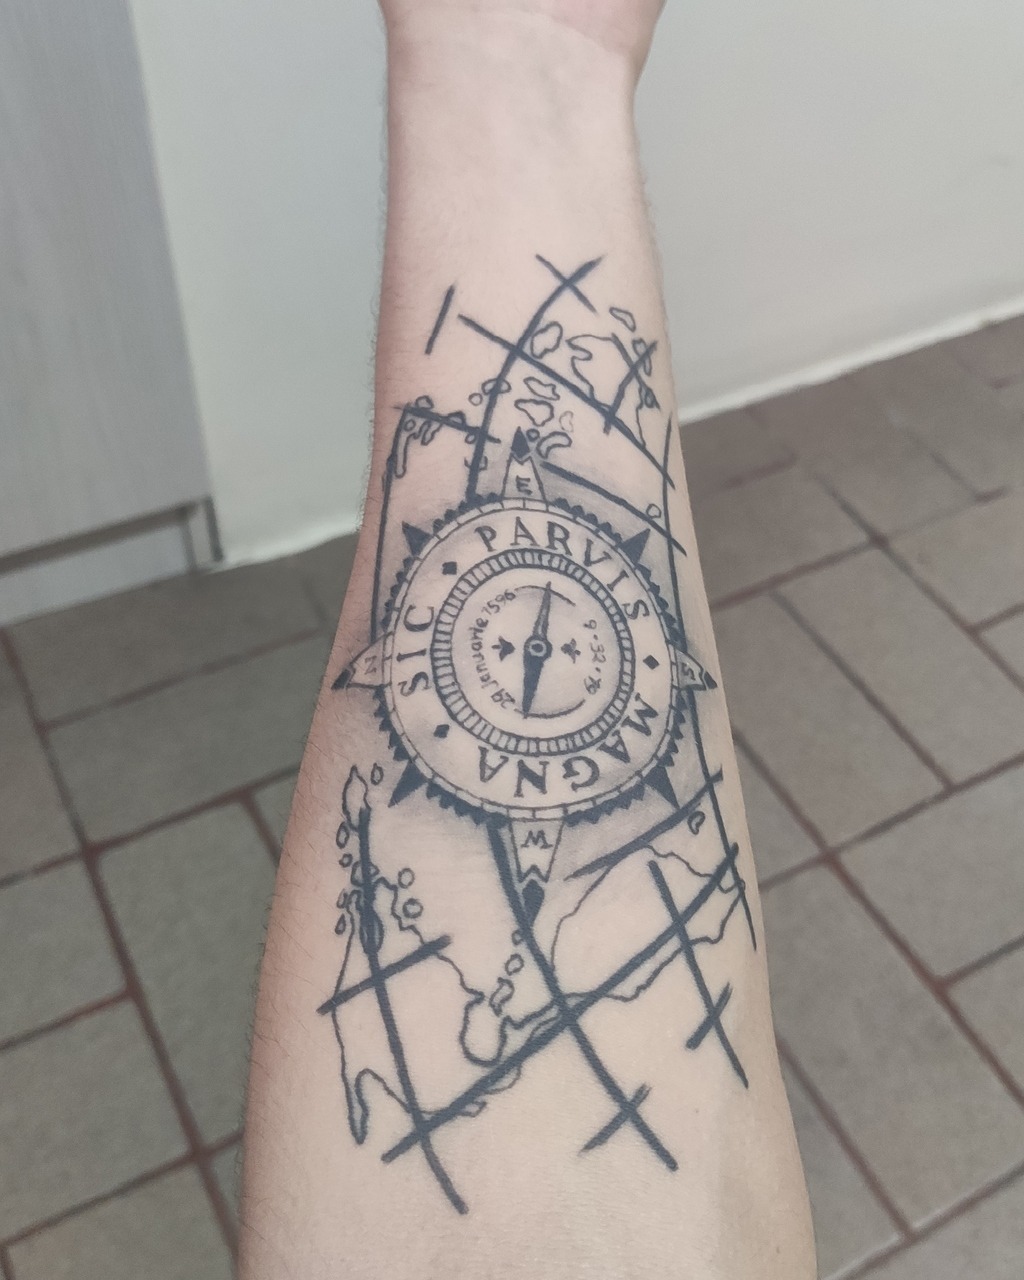 sic parvis magna tattoo  greatness from small beginnings I would have  this on the inside of my left upper arm It will  Gaming tattoo  Uncharted tattoo Tattoos